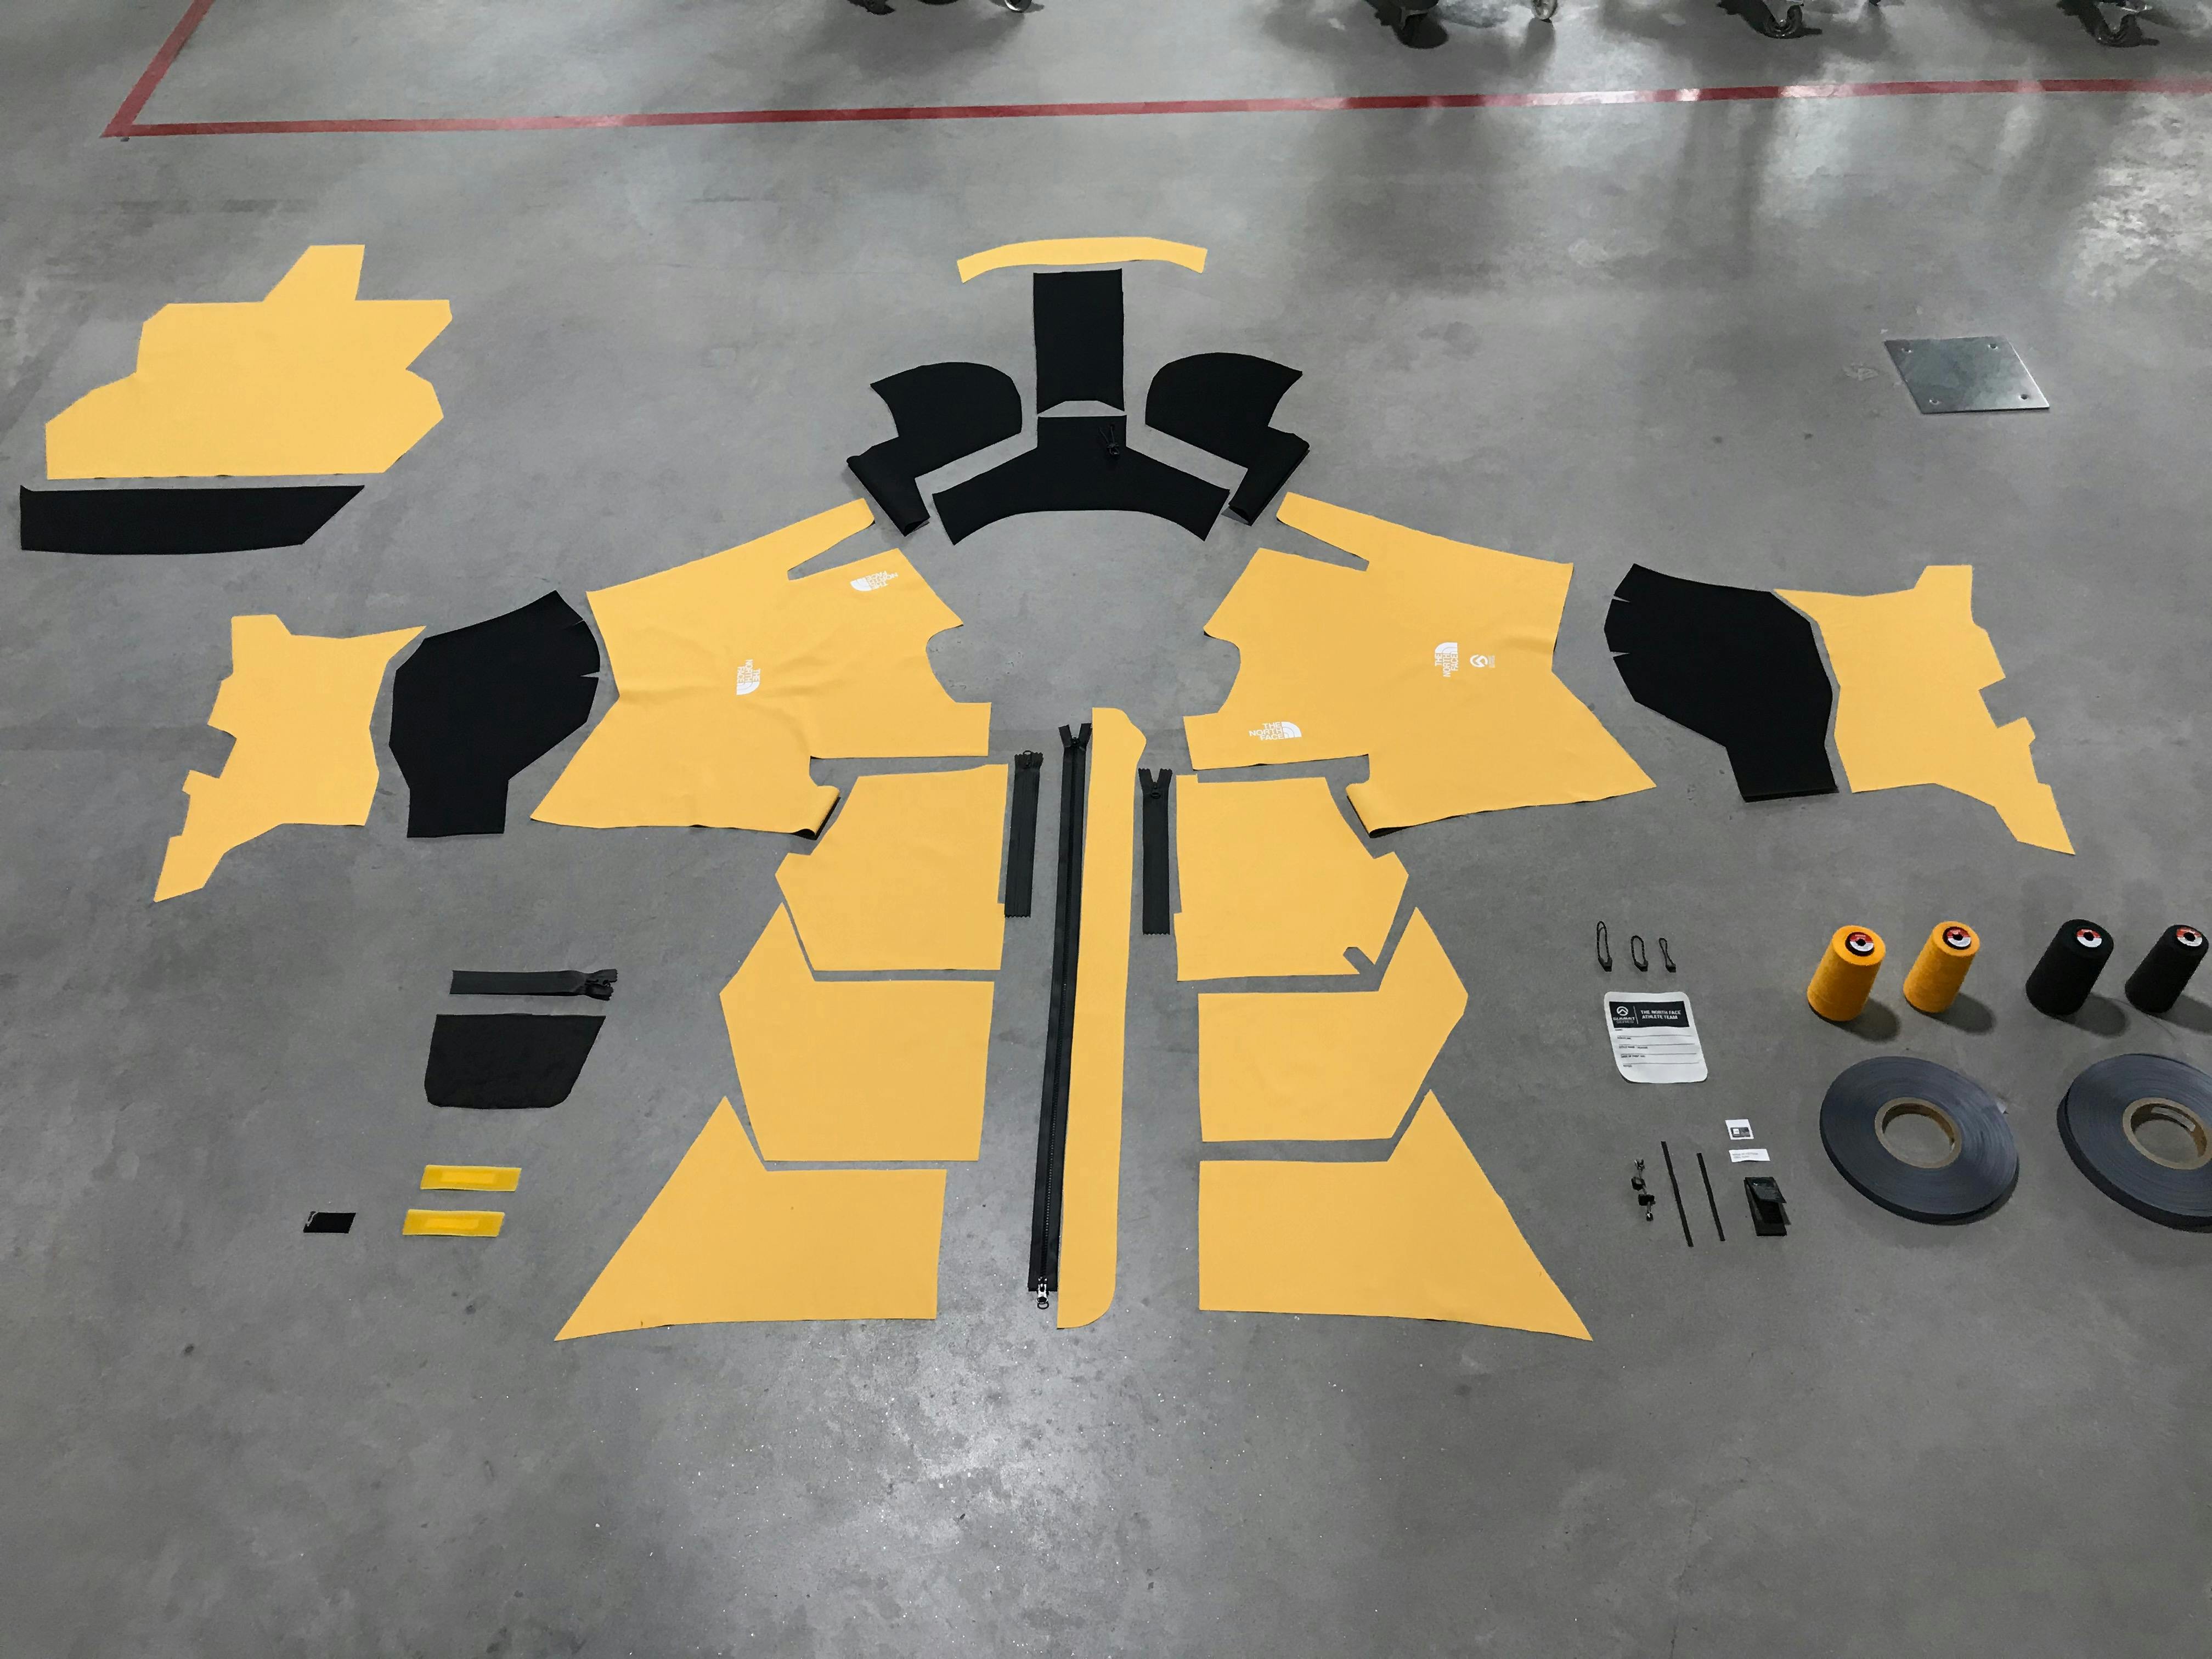 All the individual components of a North Face jacket laid out on the factory floor.